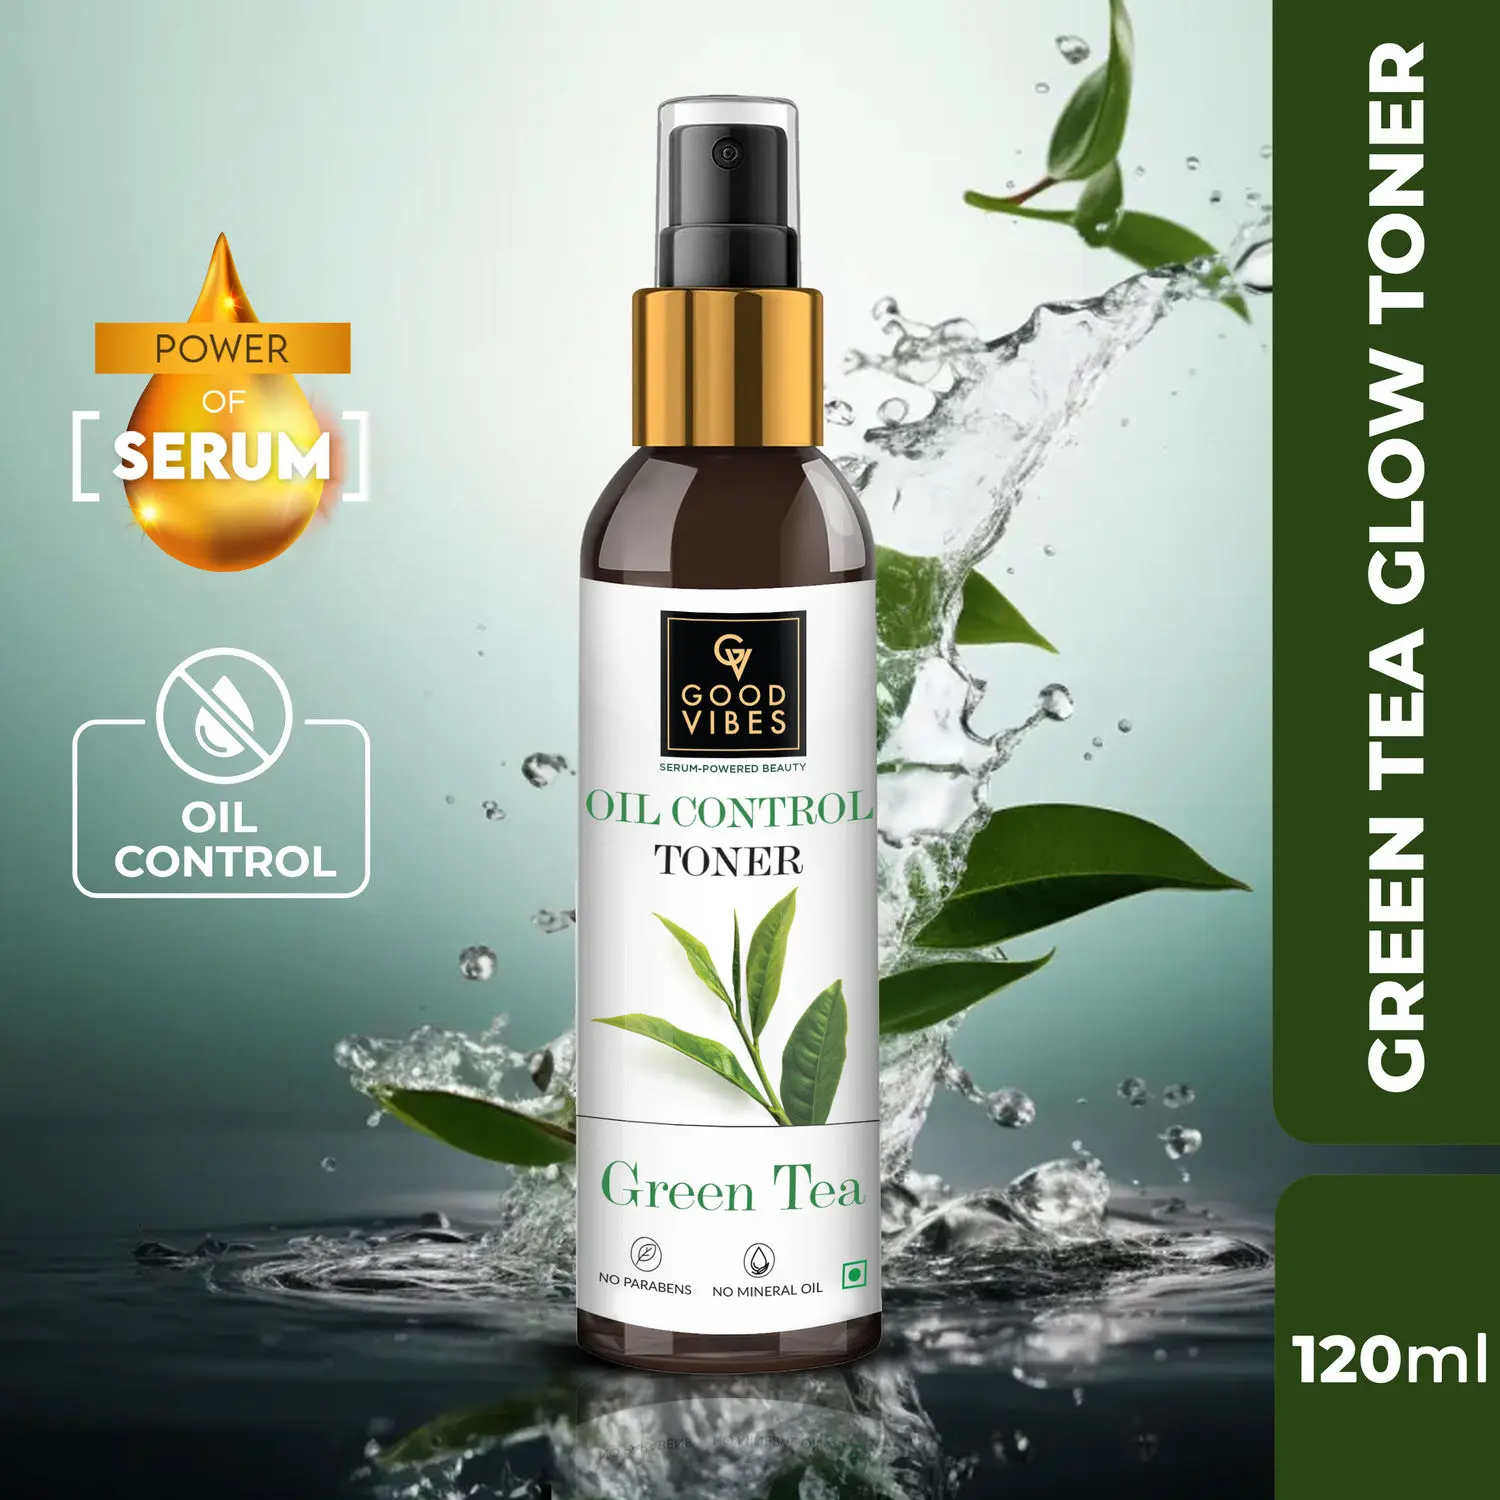 Good Vibes Green Tea Oil Control Toner with Power of Serum (120 ml)